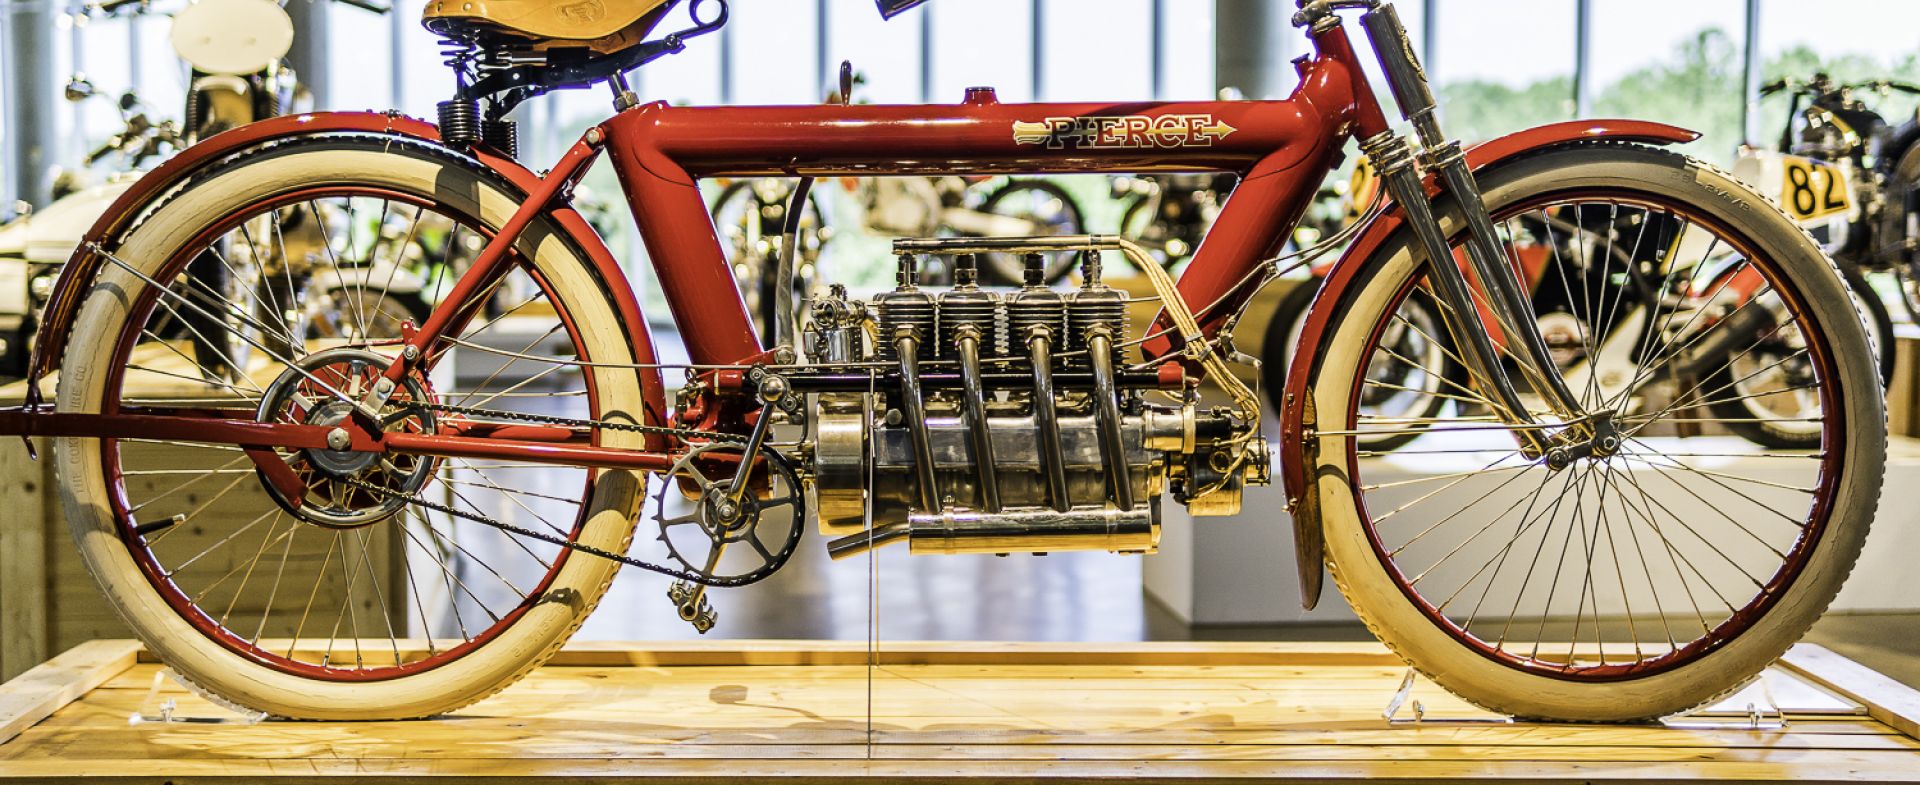 A Tale of Three American Motorcycle Museums